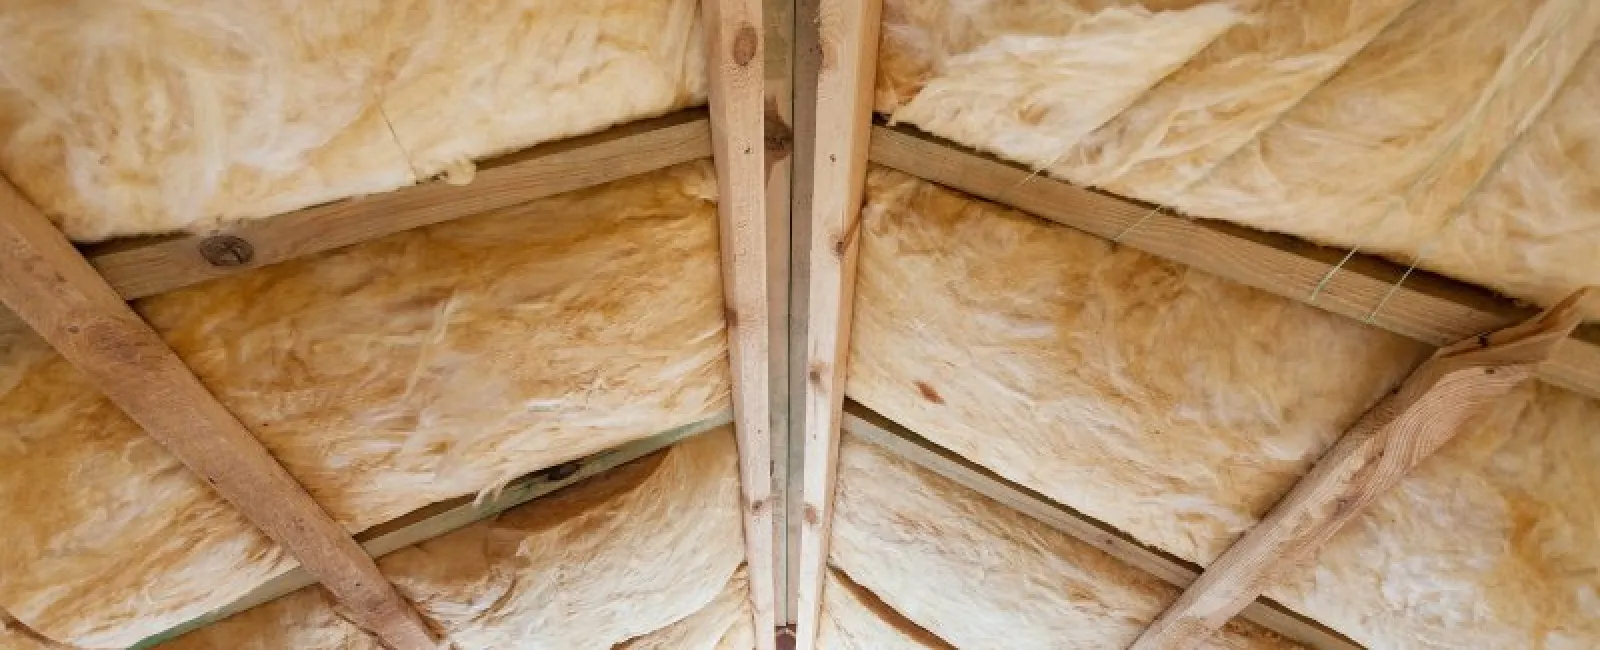 5 Signs You Need New Attic Insulation